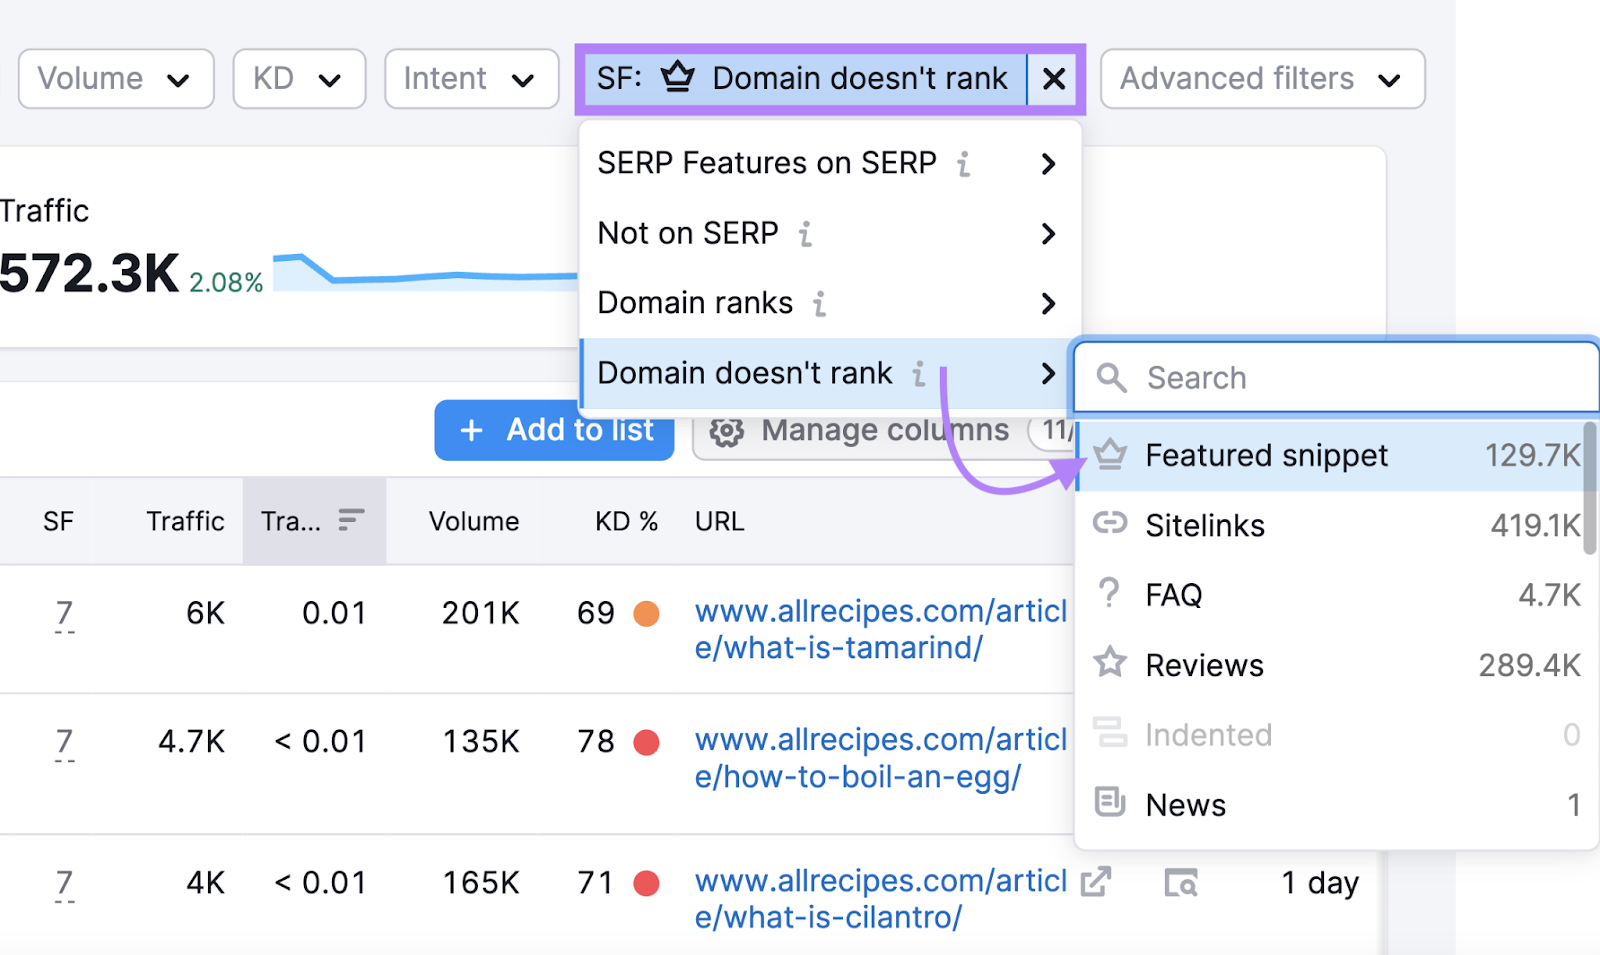 “Featured snippet" selected nether  "Domain doesn't rank"